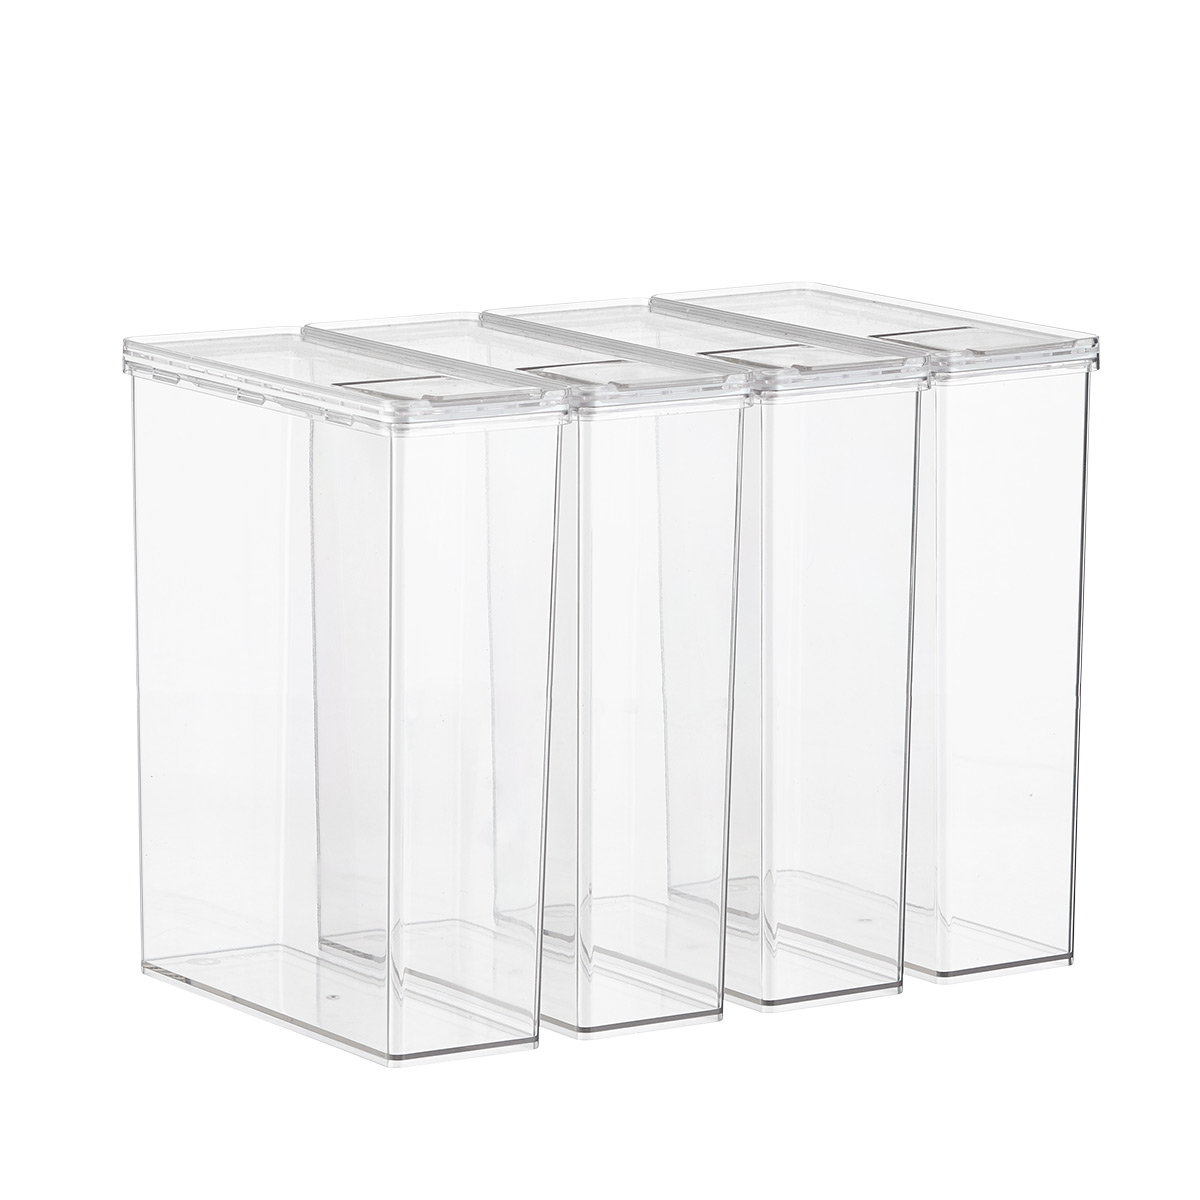 Case of 4 T.H.E. Cereal Canister Clear